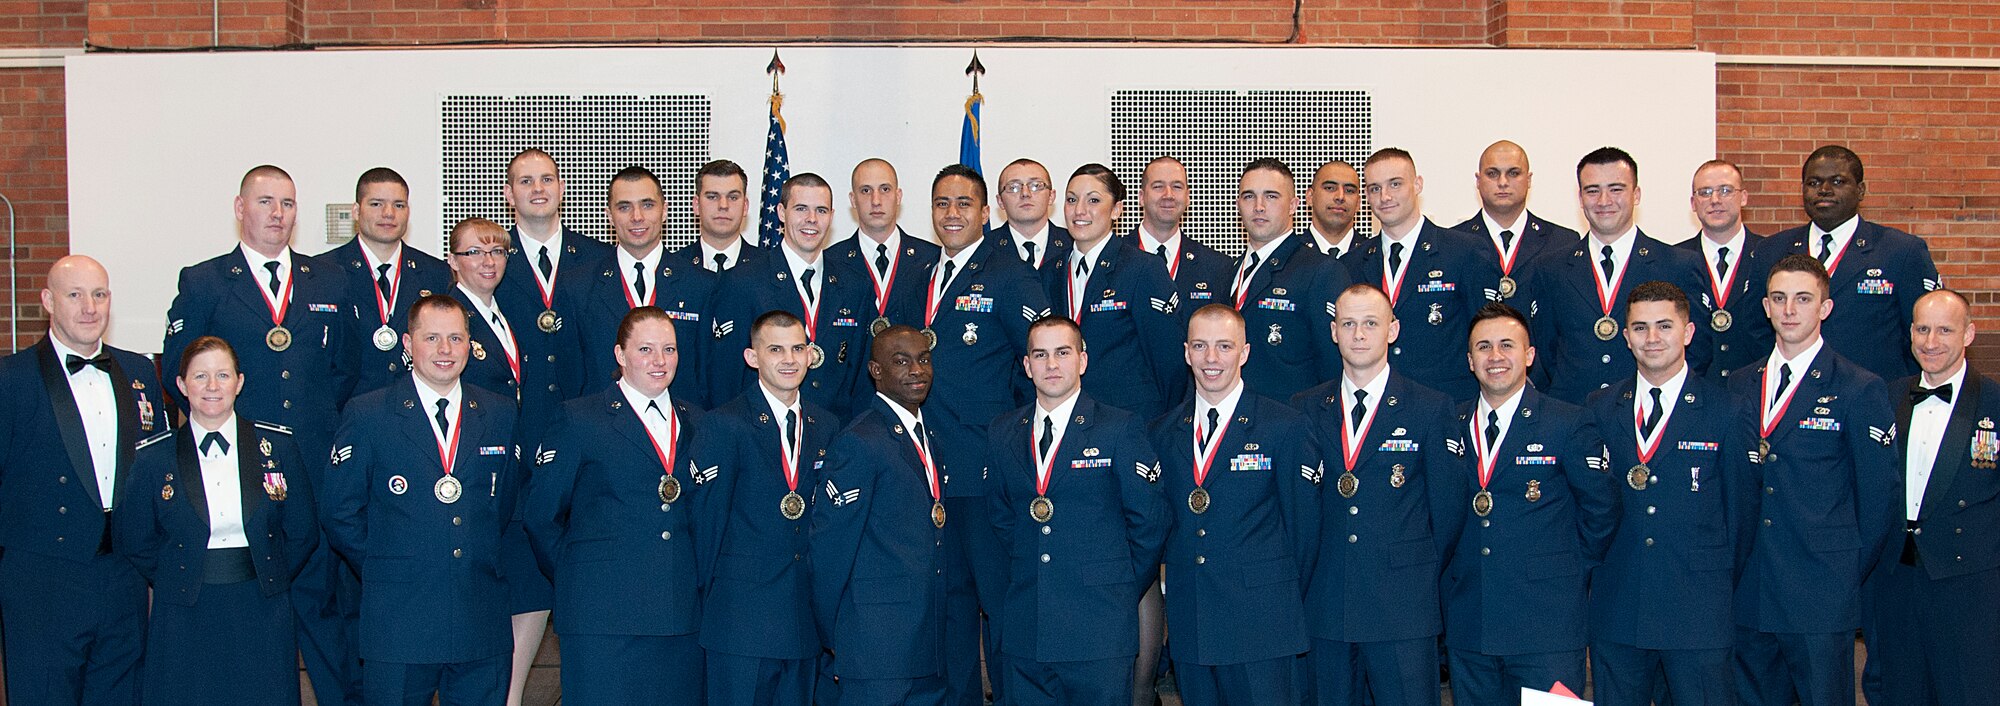 Col. Tracey Hayes, 90th Missile Wing commander; Chief Master Sgt. Samuel Couch, 90th Missile Wing command chief; and Chief Master Sgt. Steven Thompson, 90th Security Forces Squadron security forces manager, pose with Airman Leadership School Class 15-C Feb. 11, 2015, on F.E. Warren Air Force Base, Wyo. ALS is a six-week course designed to prepare Airmen to assume supervisory duties as well as instruction in the practice of leadership and followership. Enlisted Airmen must graduate ALS before supervising other Airmen. (U.S. Air Force photo by Senior Airman Jason Wiese)